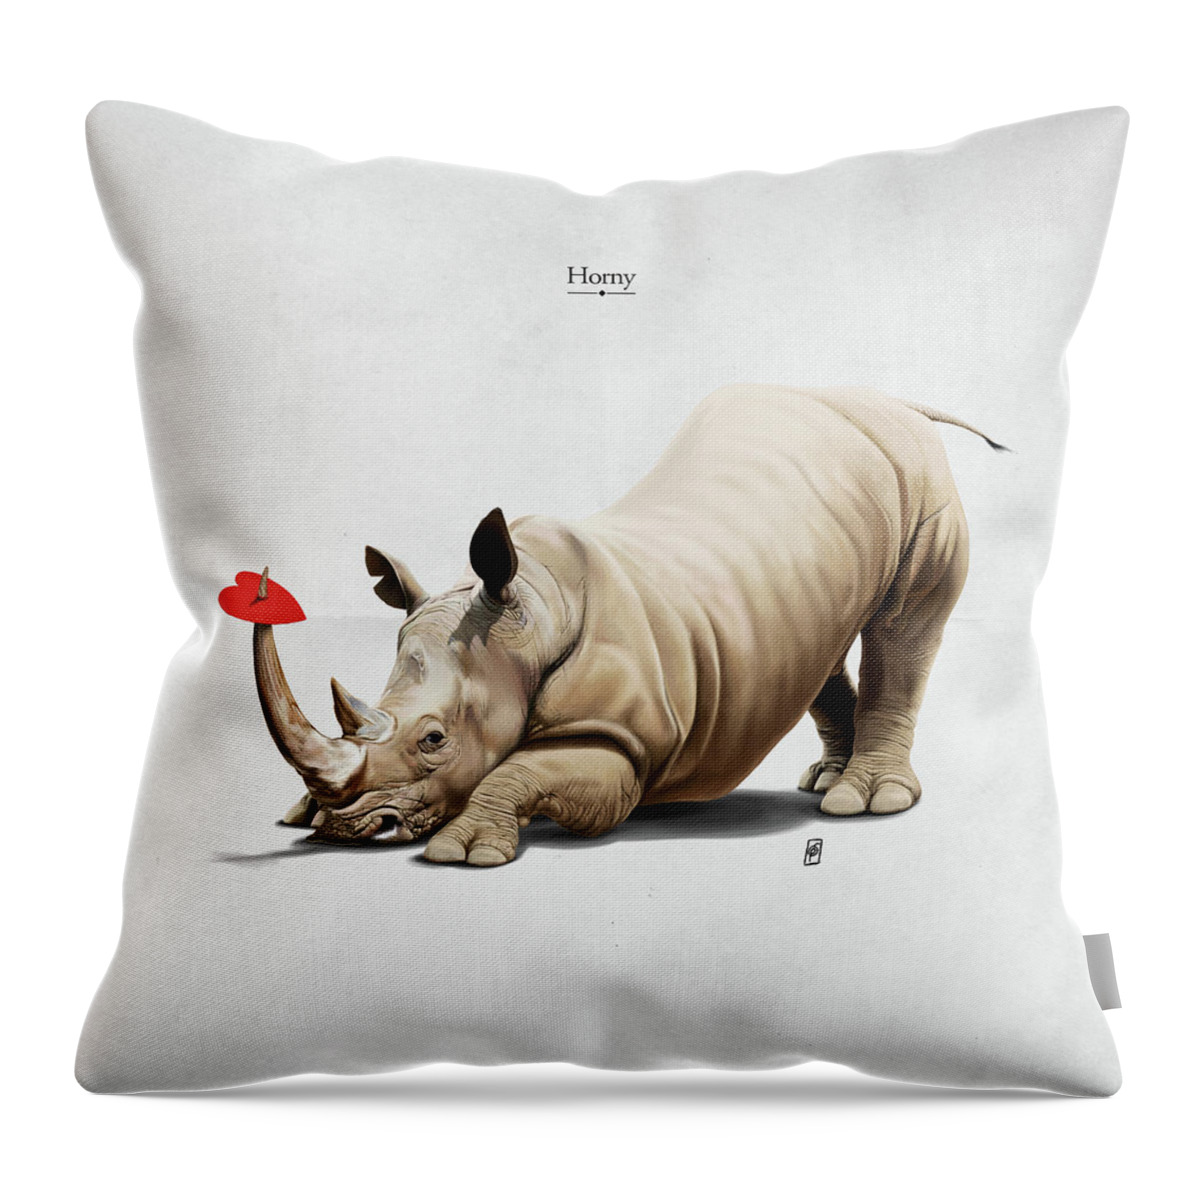 Illustration Throw Pillow featuring the digital art Horny by Rob Snow